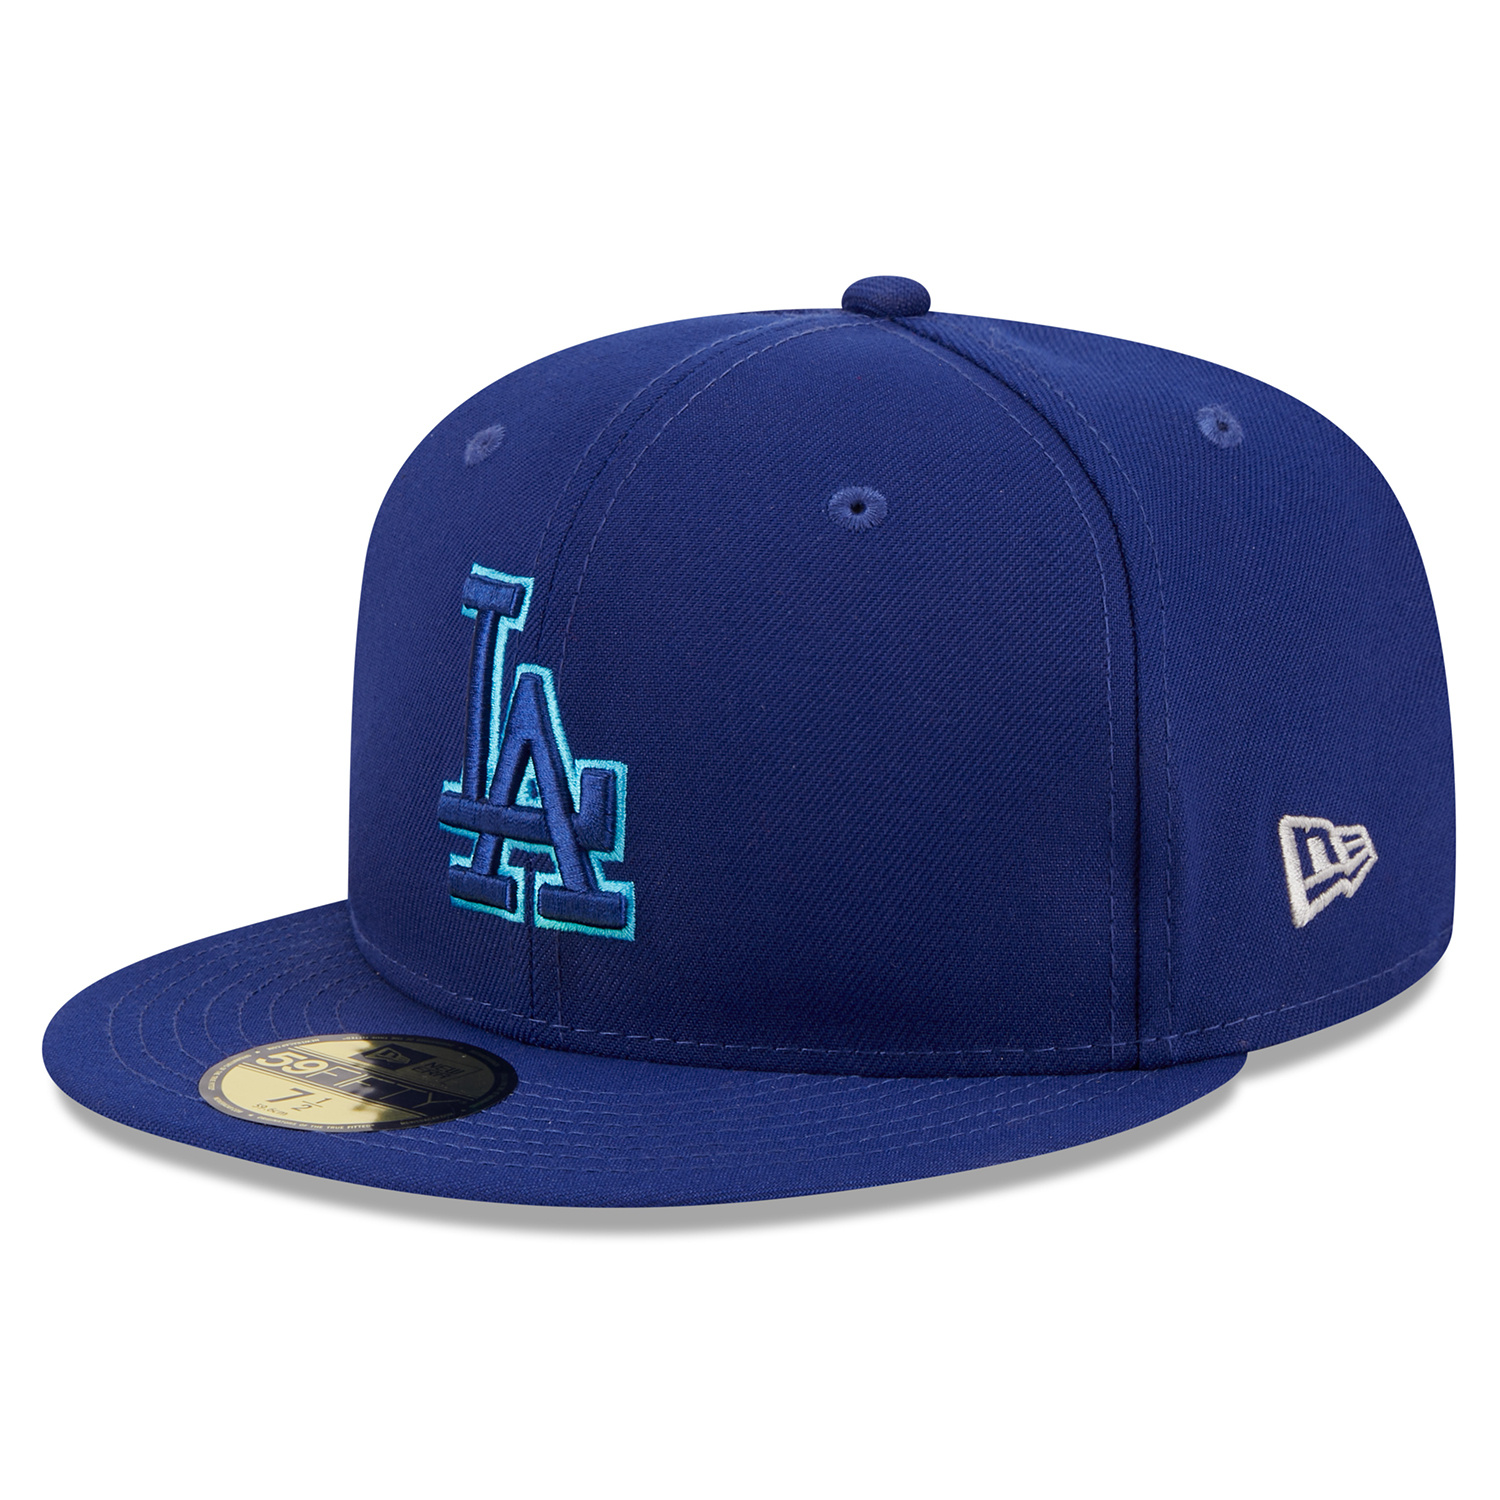 5950 Los Angeles Dodgers Father's Day 23 Cap